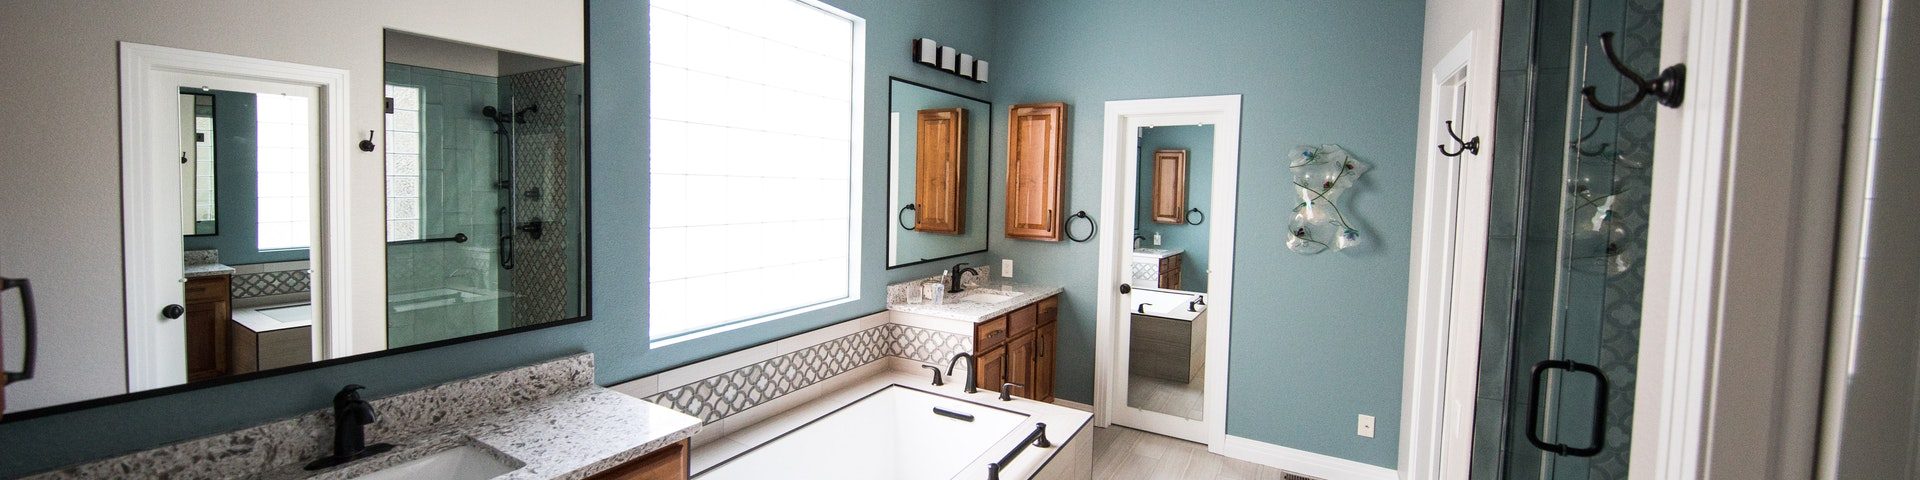 5 Tricks To Make Your Bathroom Look Bigger Without Major Fixes